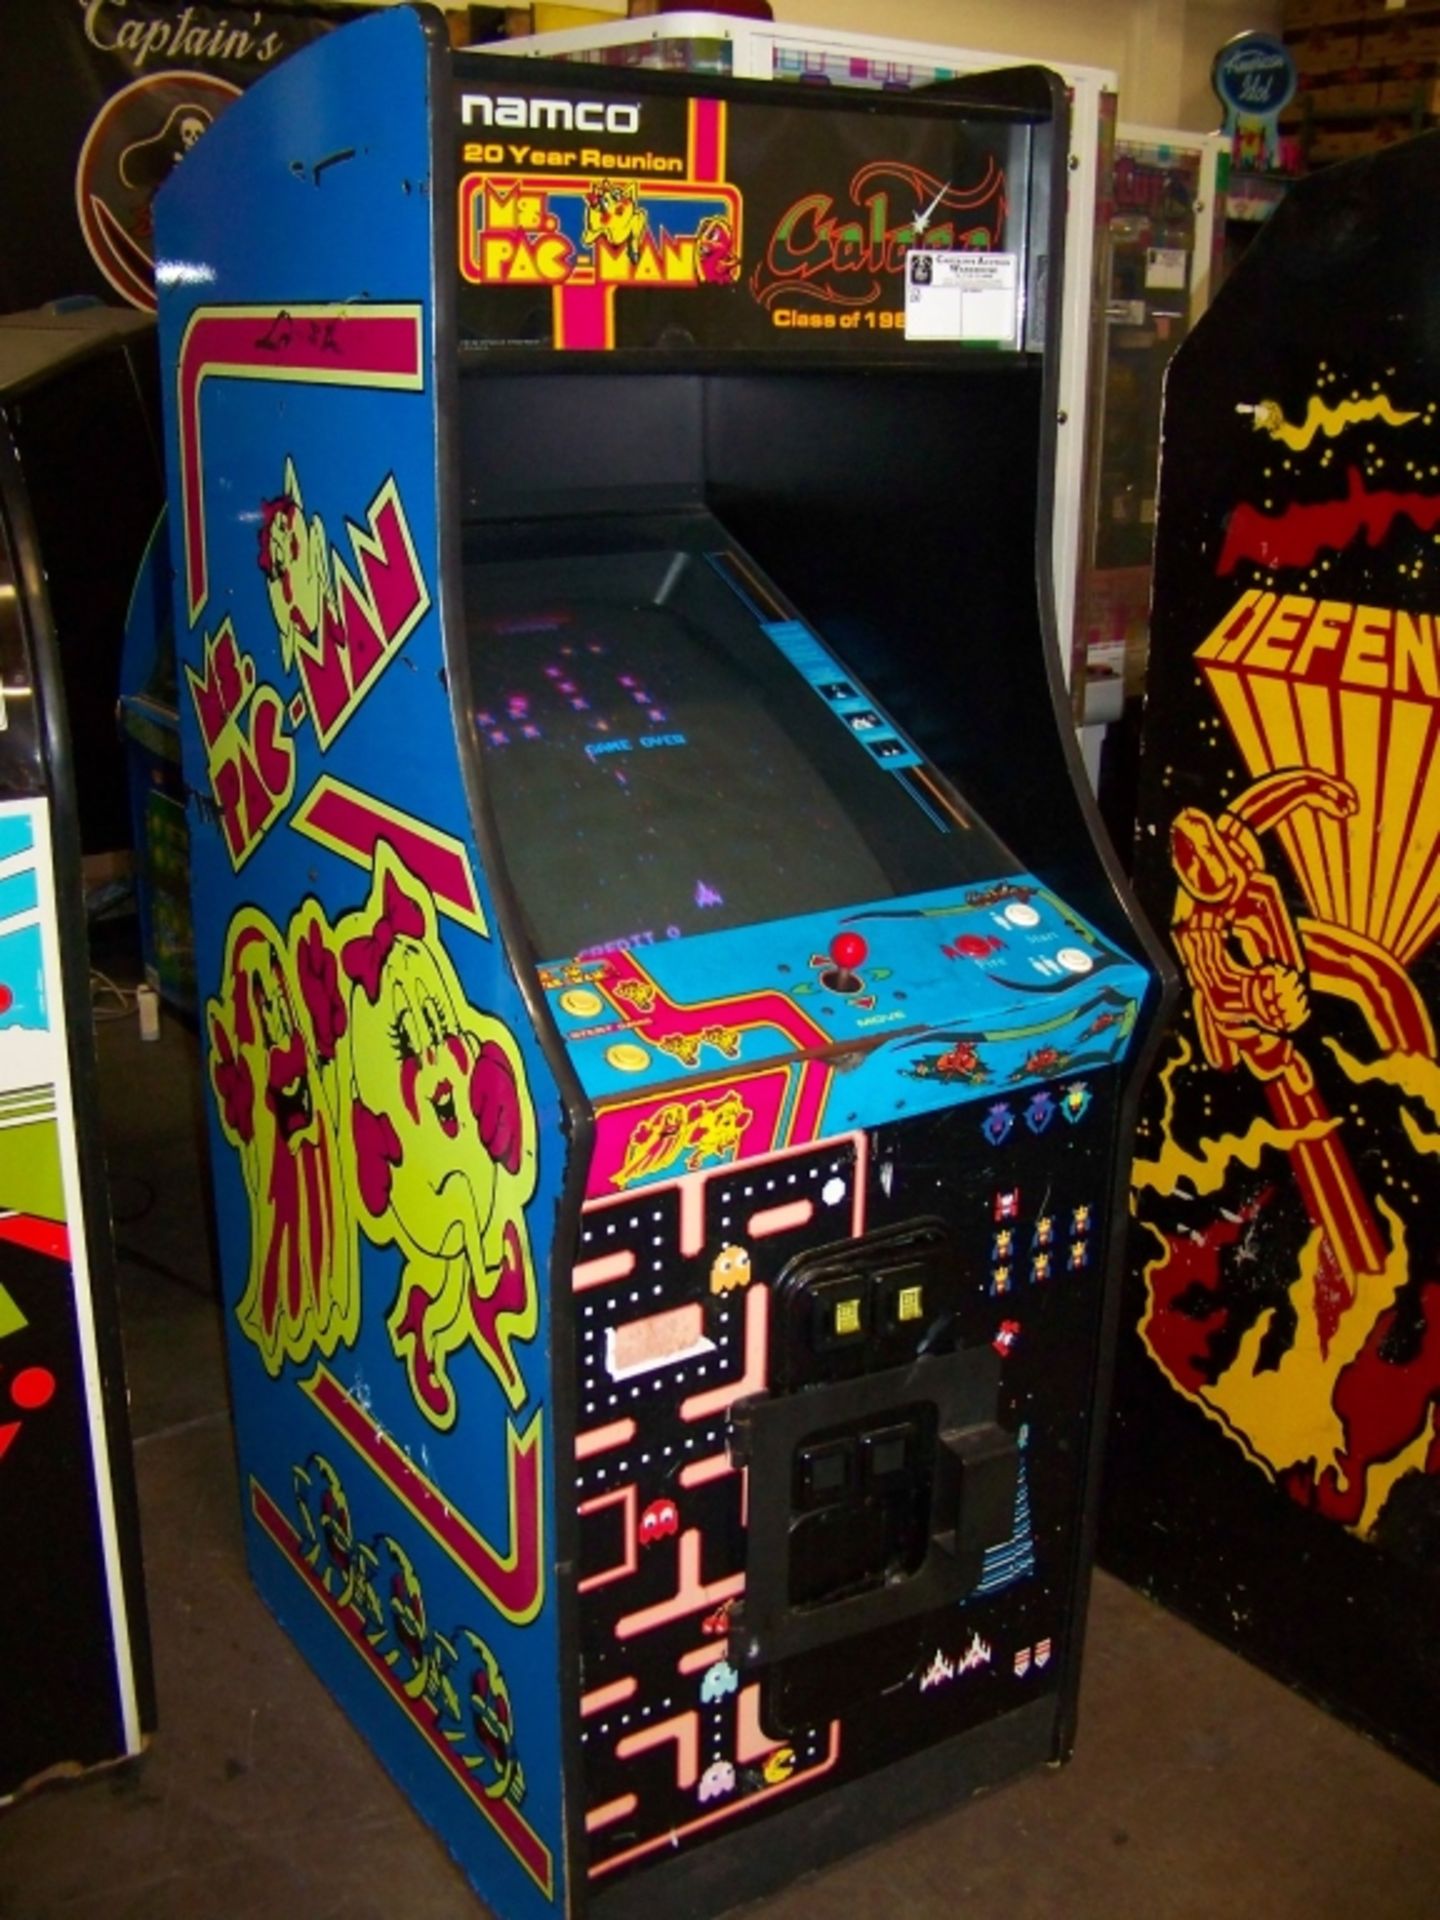 MS. PACMAN GALAGA CLASS OF 1981 ARCADE GAME - Image 4 of 5